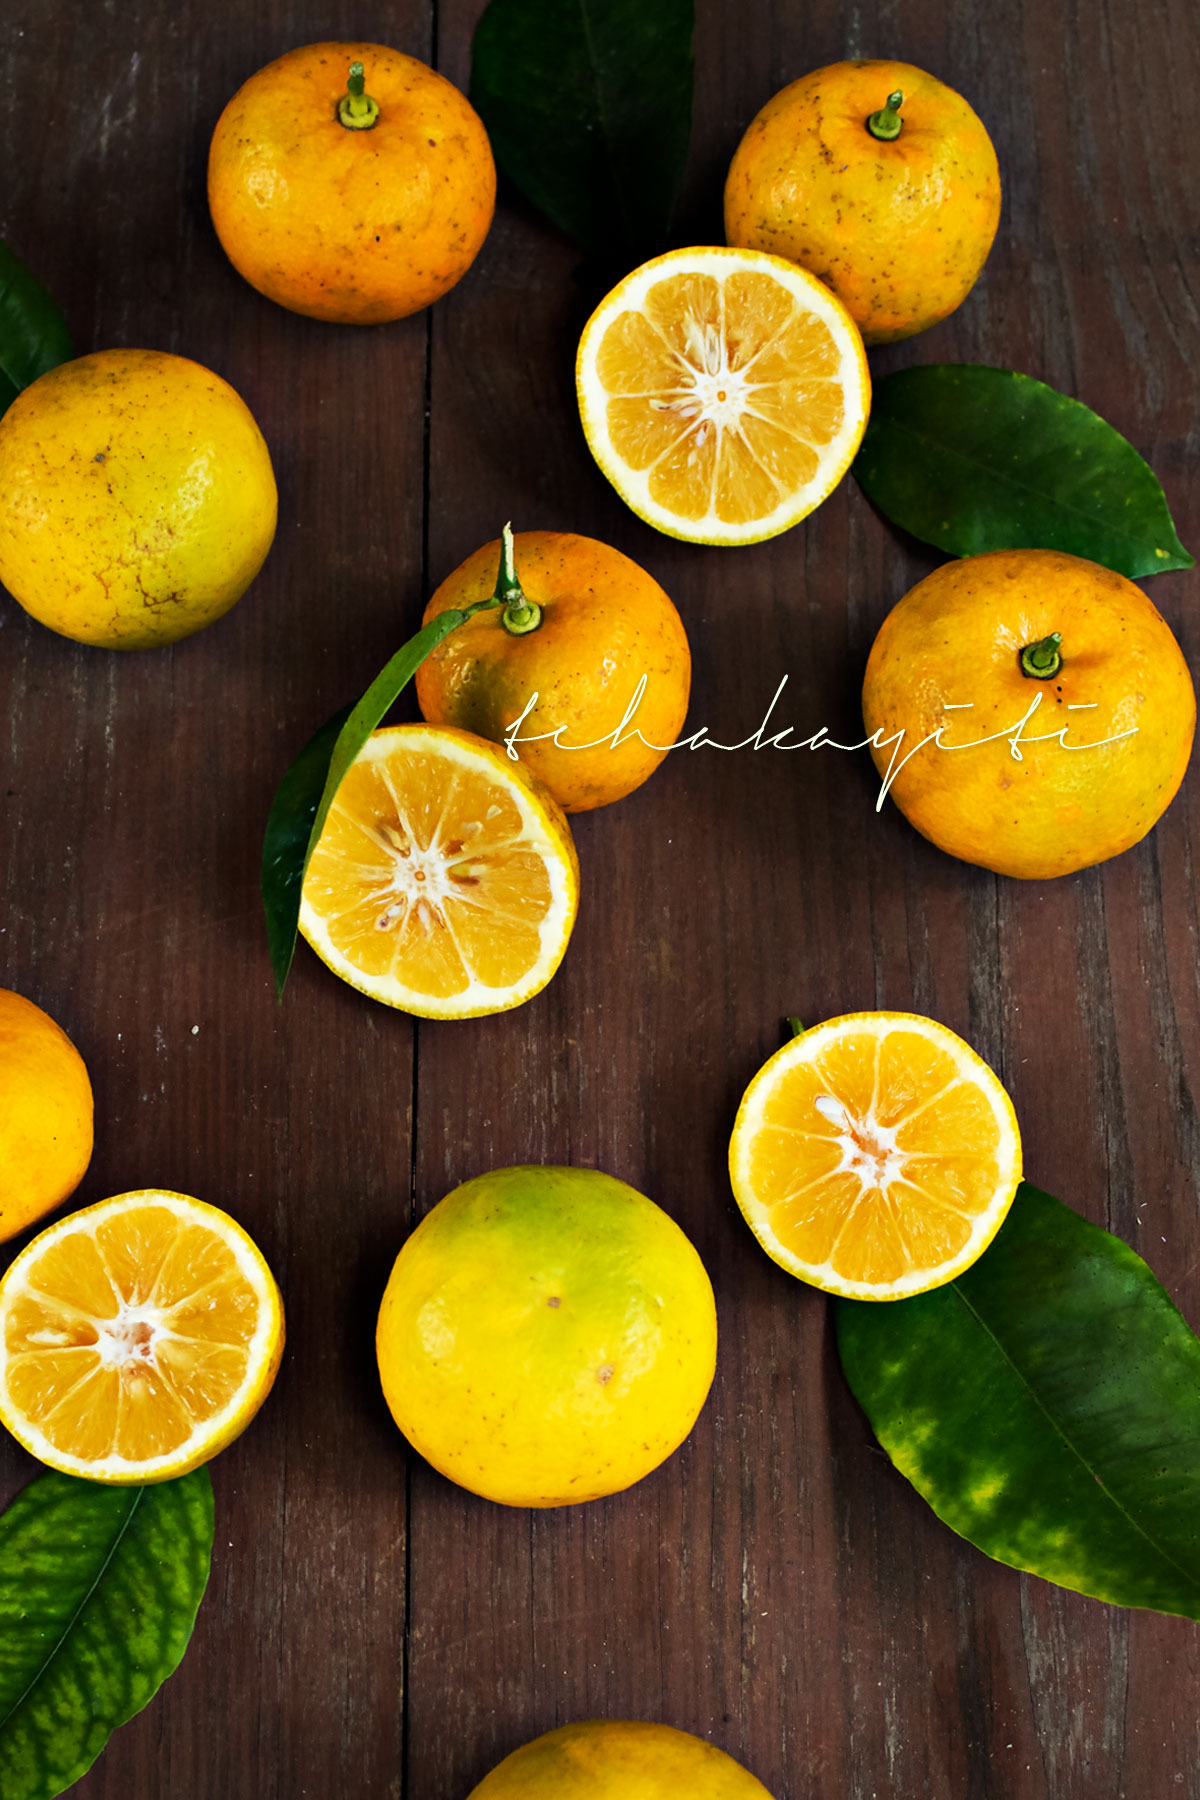 Sour oranges, a must in Haiti's culinary traditions. | tchakayiti.com